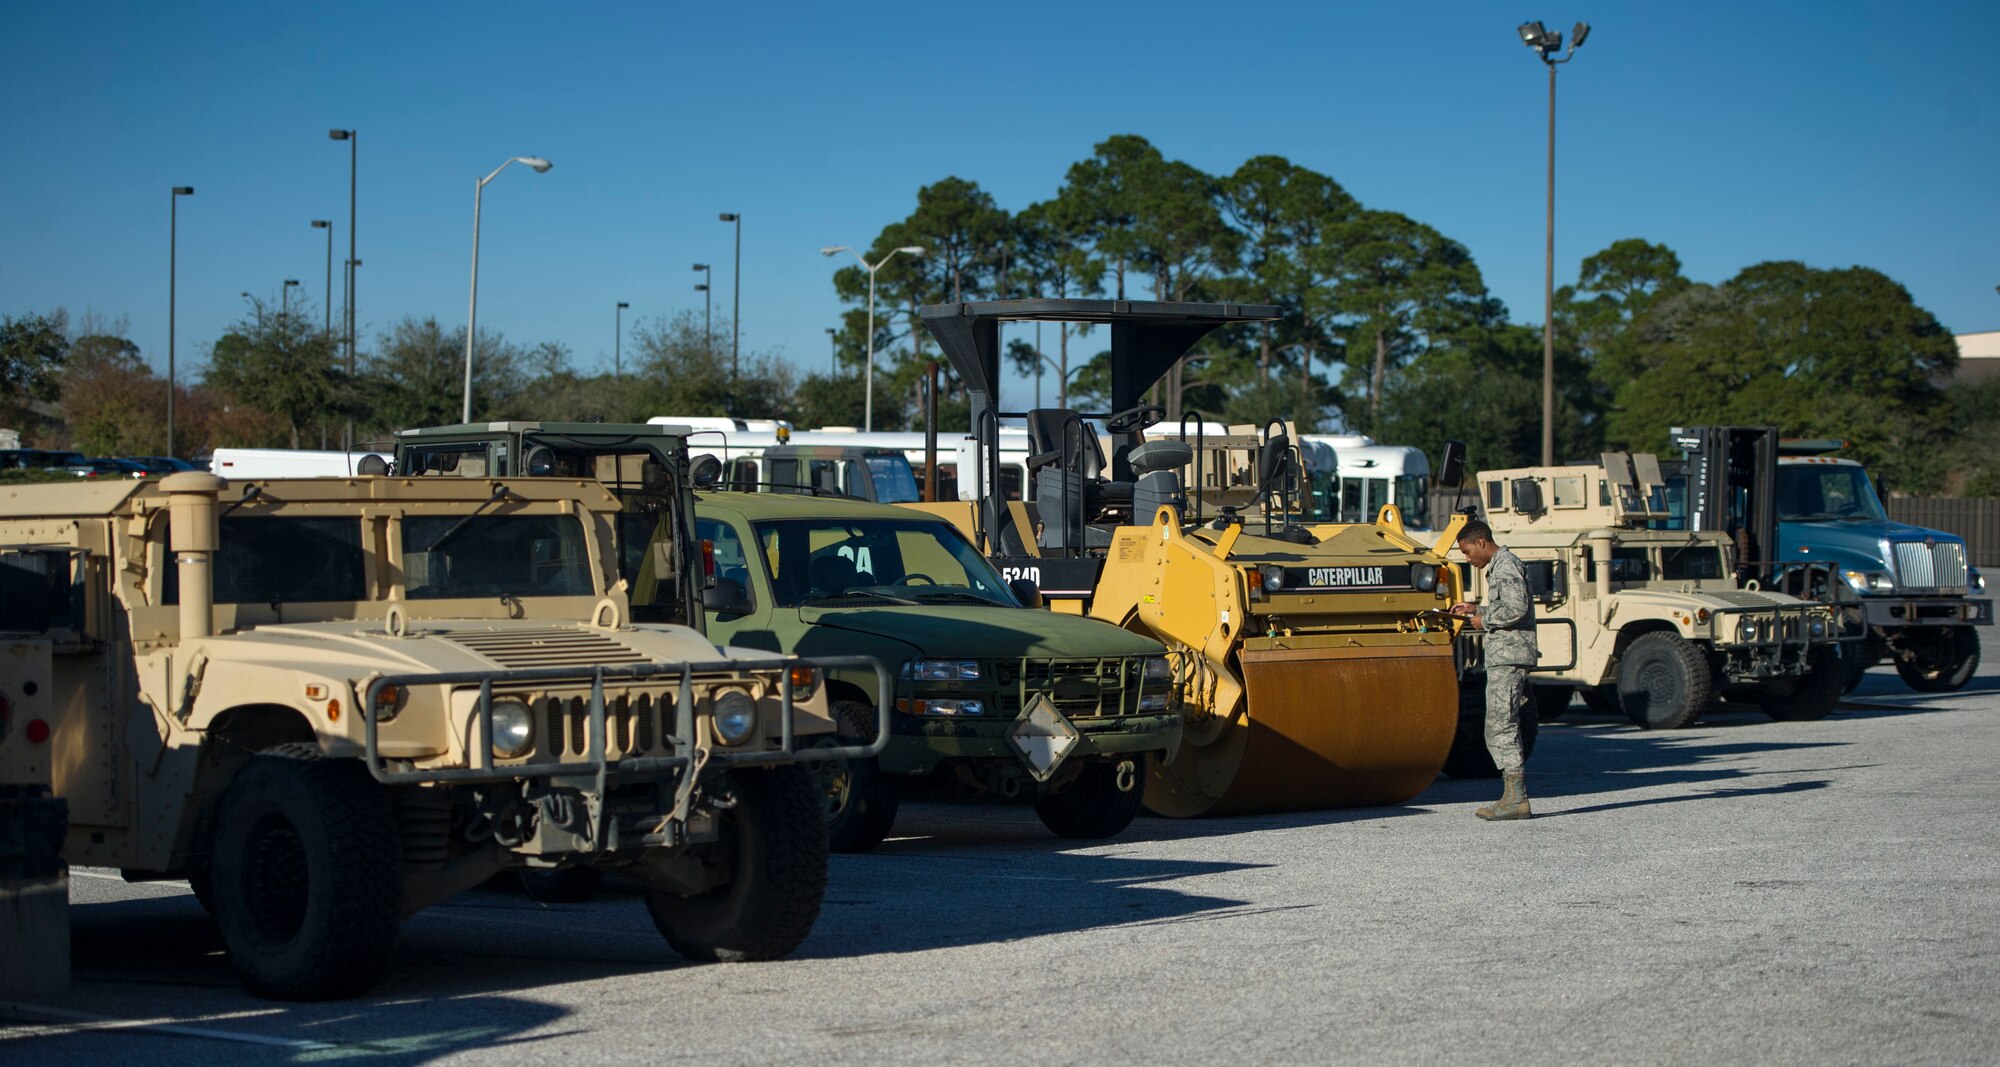 Airman 1st Class Jordan Artis, a vehicle management analysis journeyman with the 1st Special Operations Logistics Readiness Squadron, performs a yard check on Hurlburt Field, Fla., Jan. 12, 2016. Yard checks are conducted to ensure vehicles are accounted for. (U.S. Air Force photo by Senior Airman Krystal M. Garrett) 